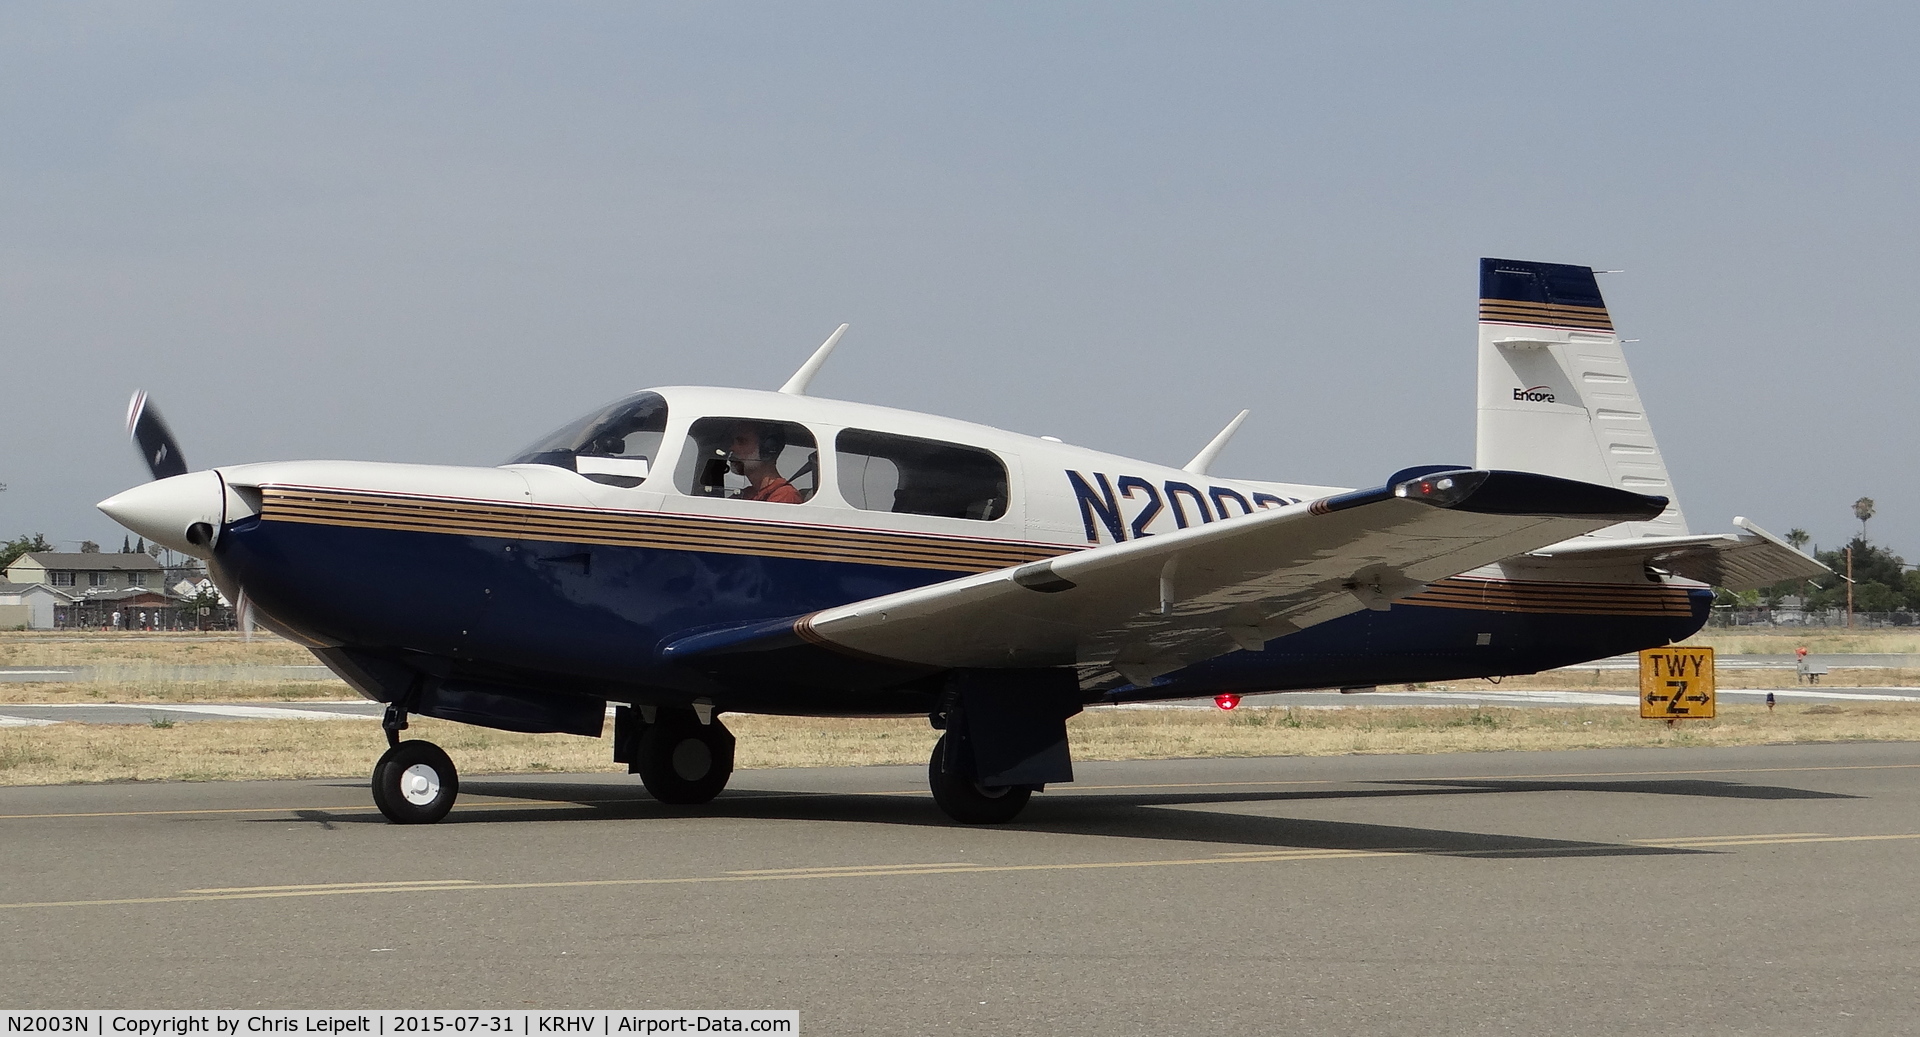 N2003N, 1997 Mooney M20K C/N 25-2005, Privately owned 1977 Mooney M20K taxing out for departure to Washington at Reid Hillview Airport, San Jose, CA.